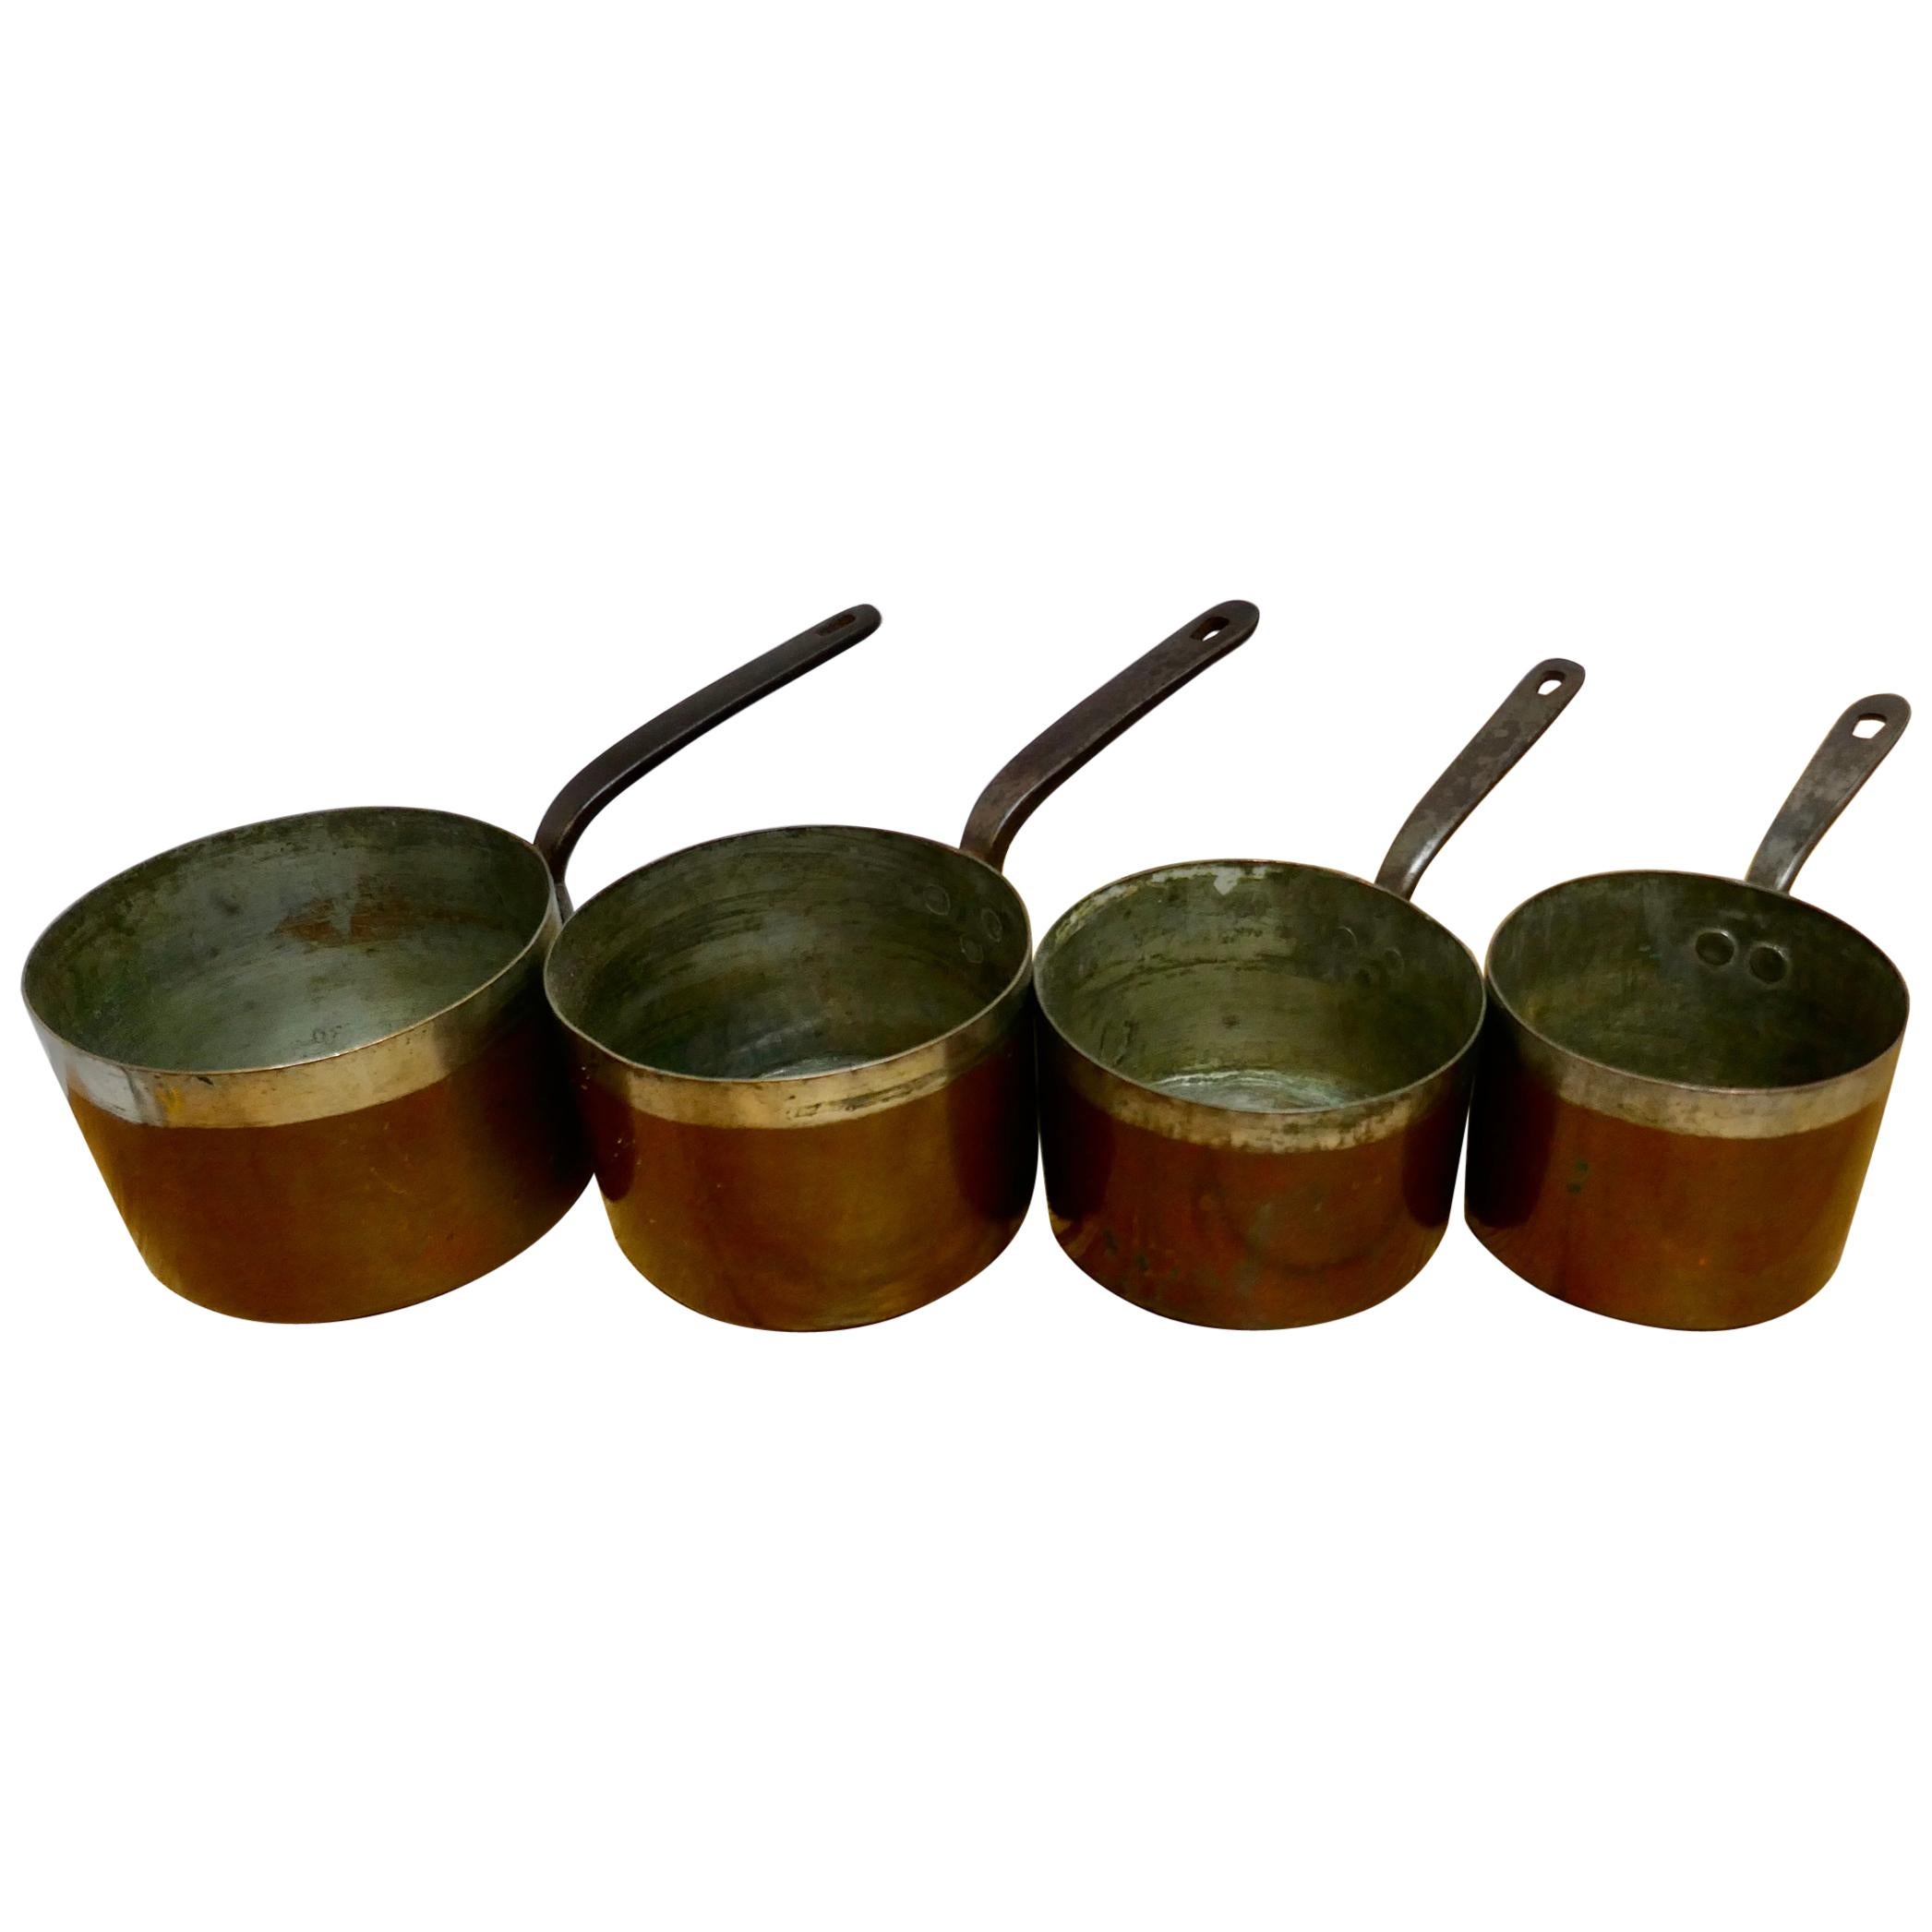 Set of 4 19th Century Scottish Tinned Copper Pots by James Grayson